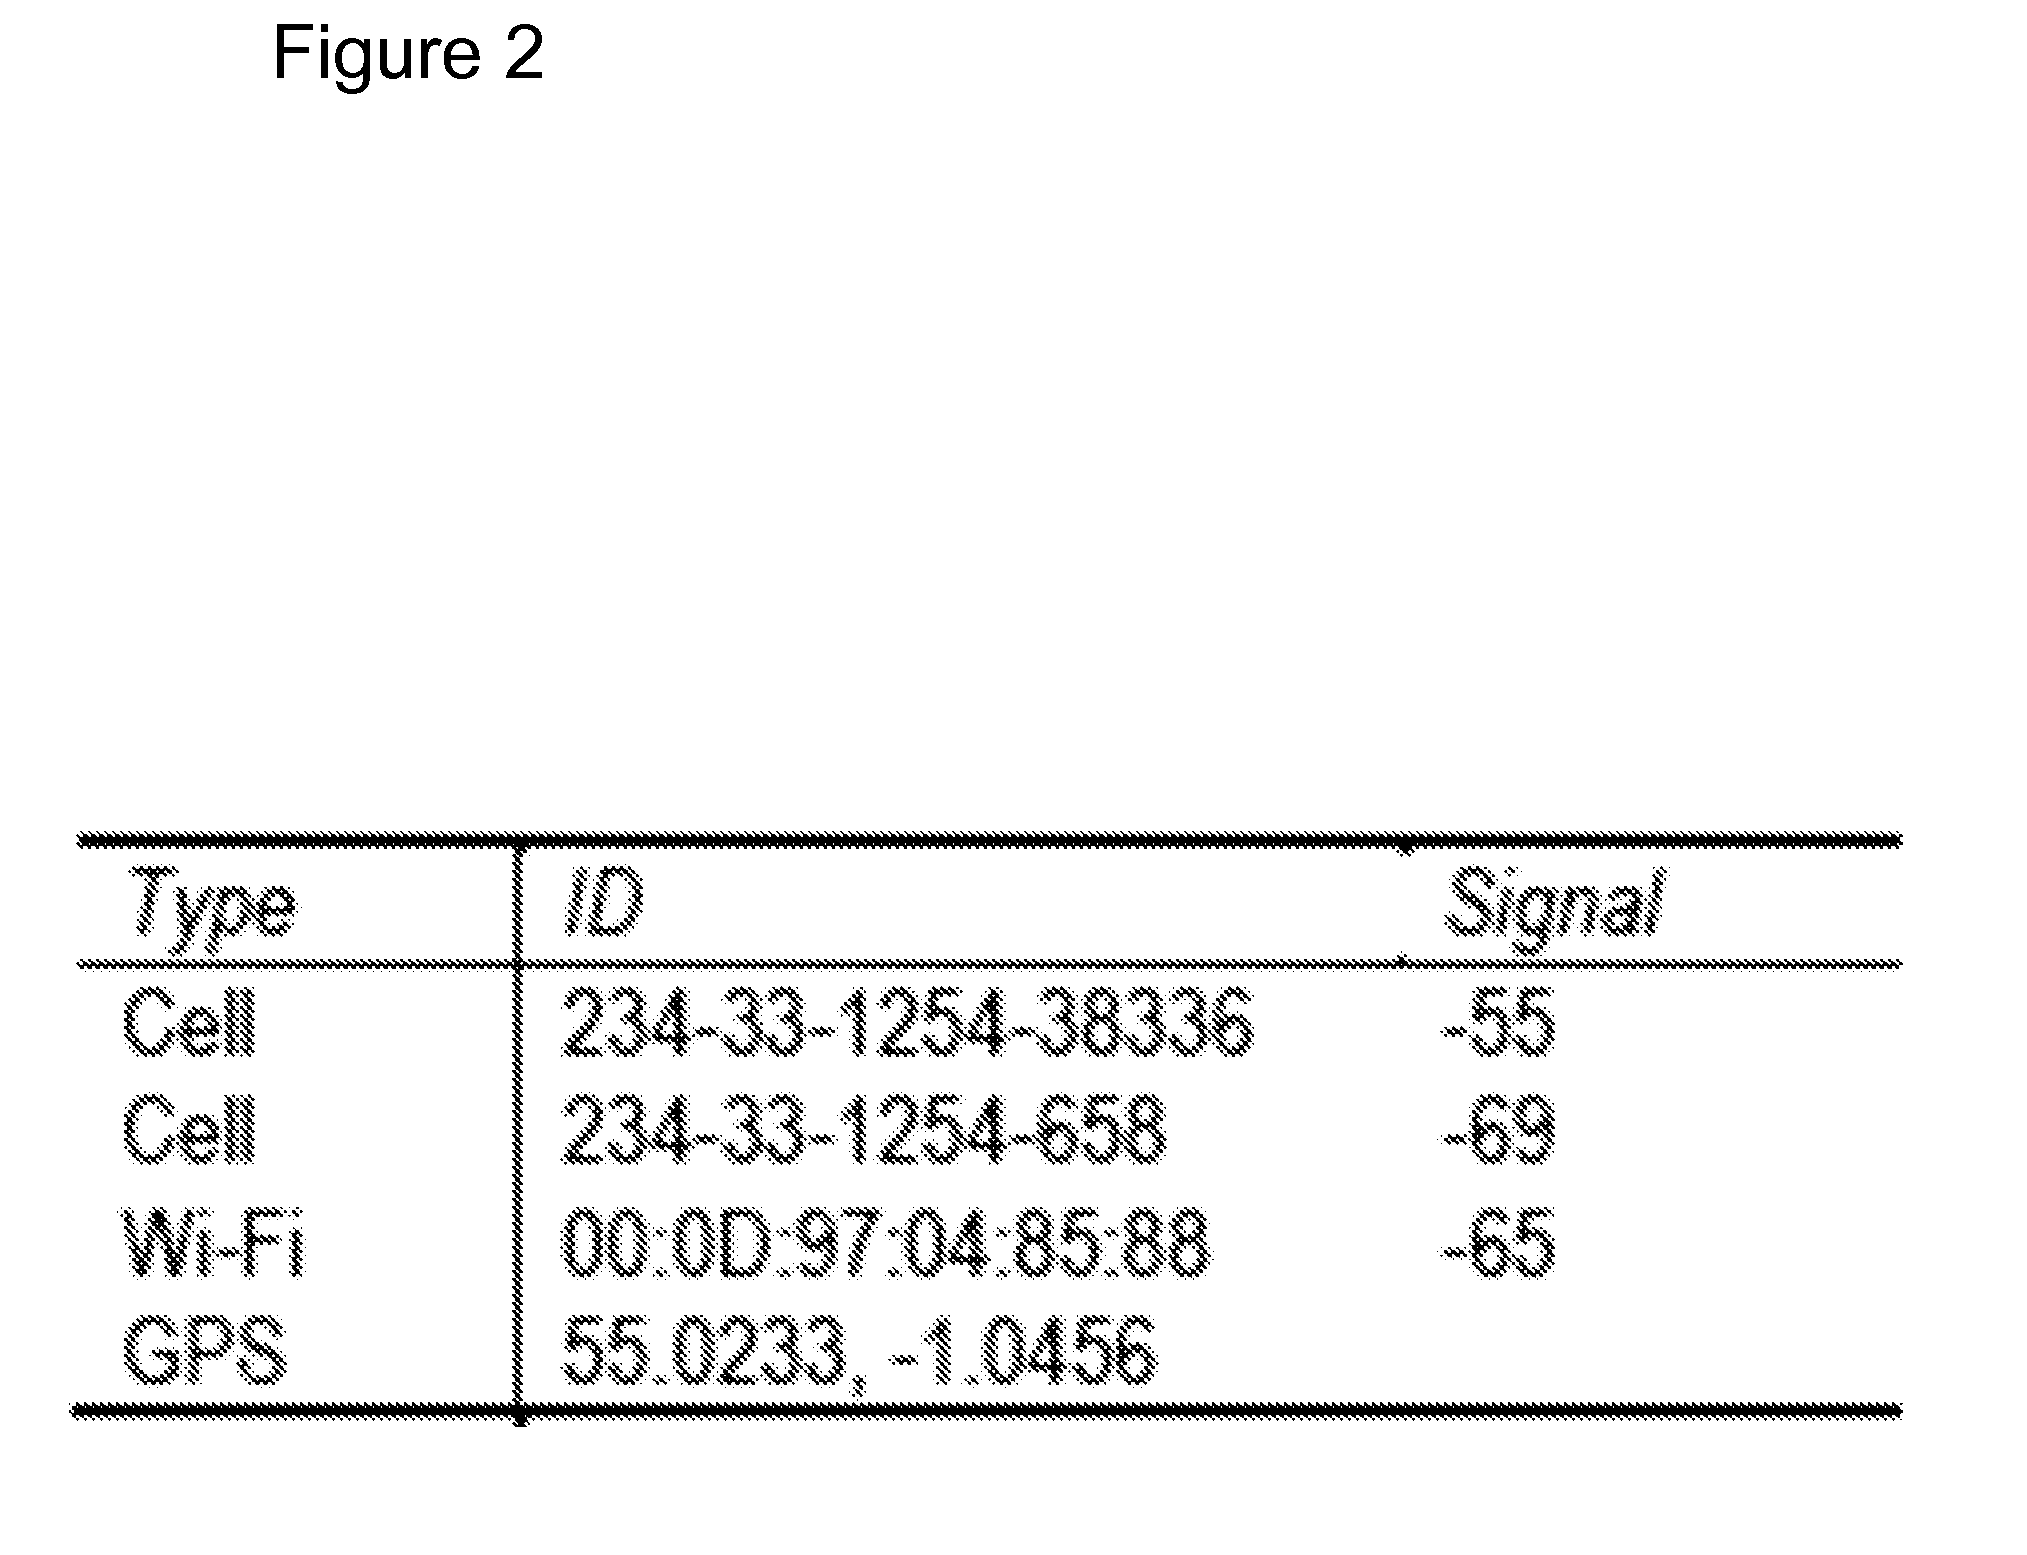 Method of building a database of mobile device beacon locations